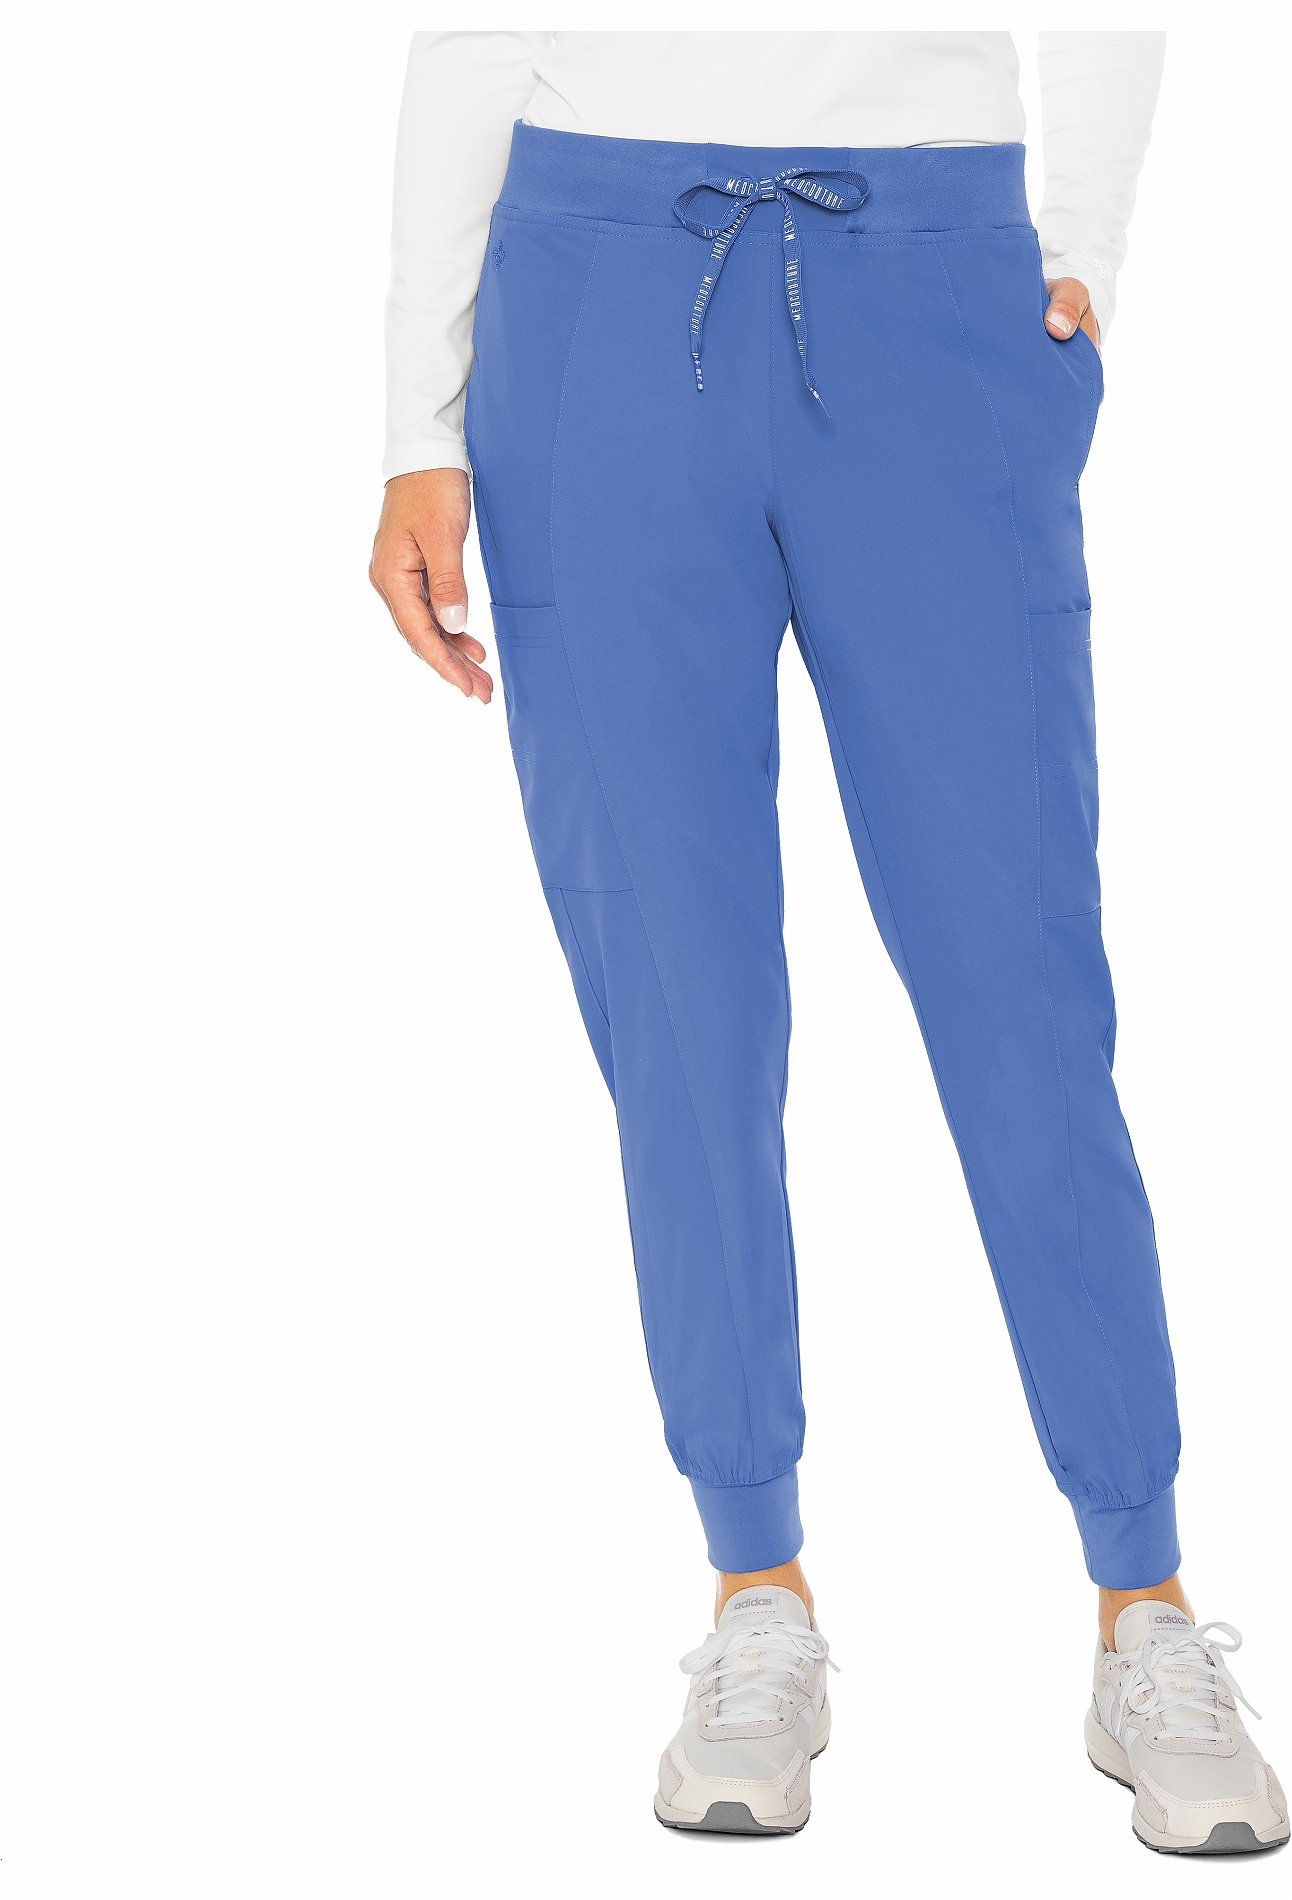 Med Couture Peaches Women's Seamed Jogger Scrub Pants-8721